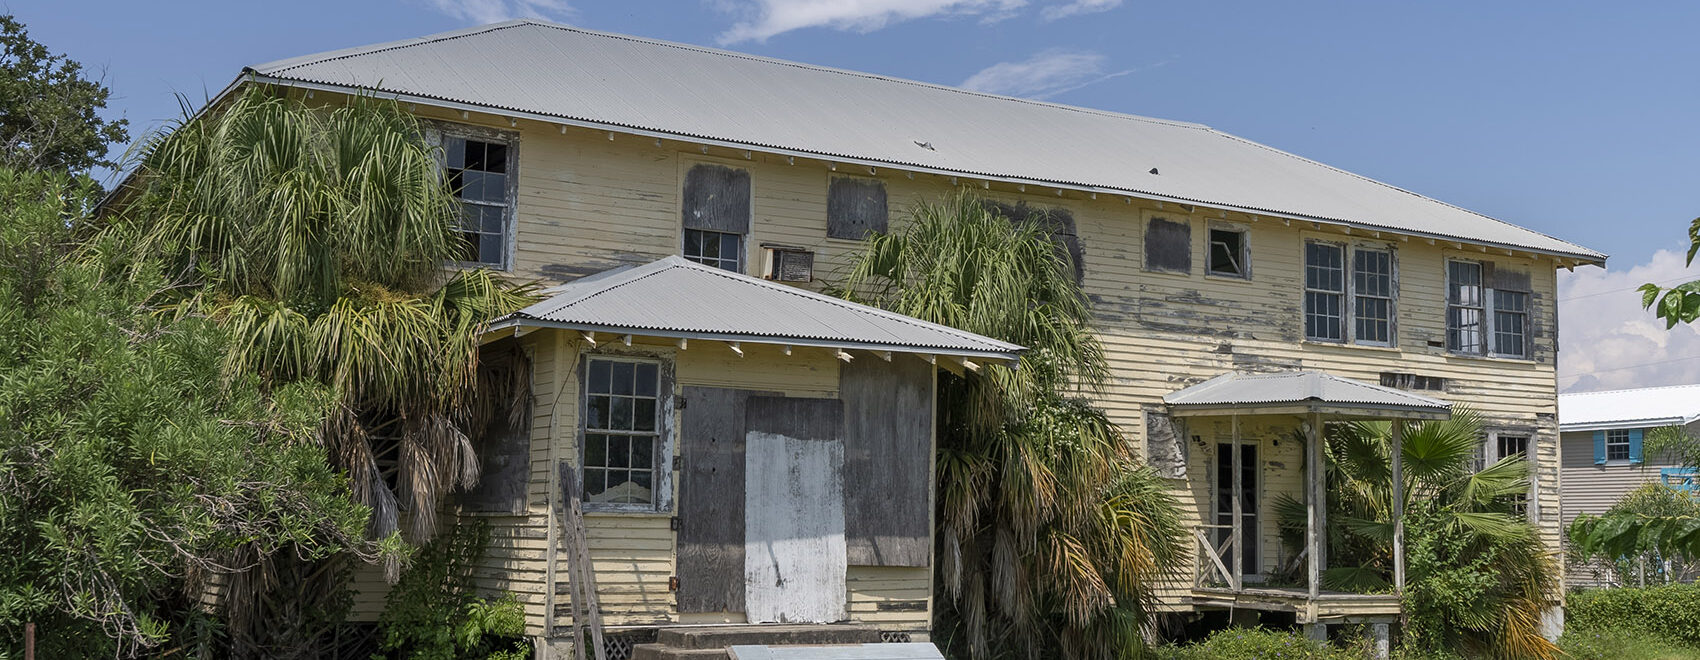 dilapidated two story yellow wood building on Grand Isle